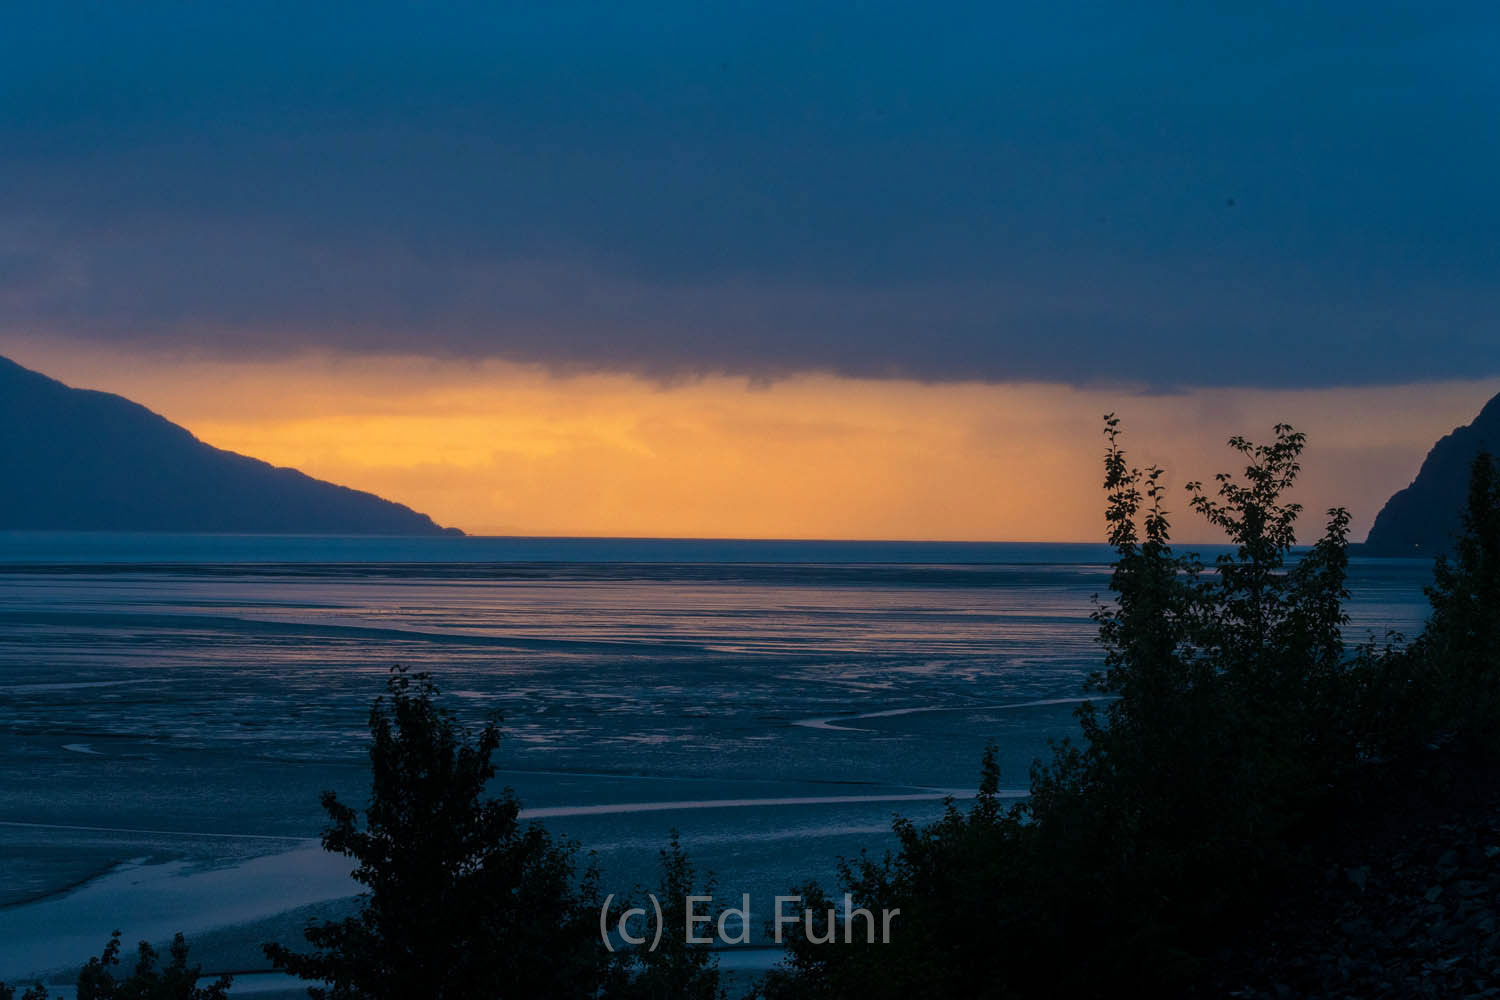 Turnagain Arm features one of the largest bore tides in the world.  The bore tide is a huge wave or series of waves that advance...